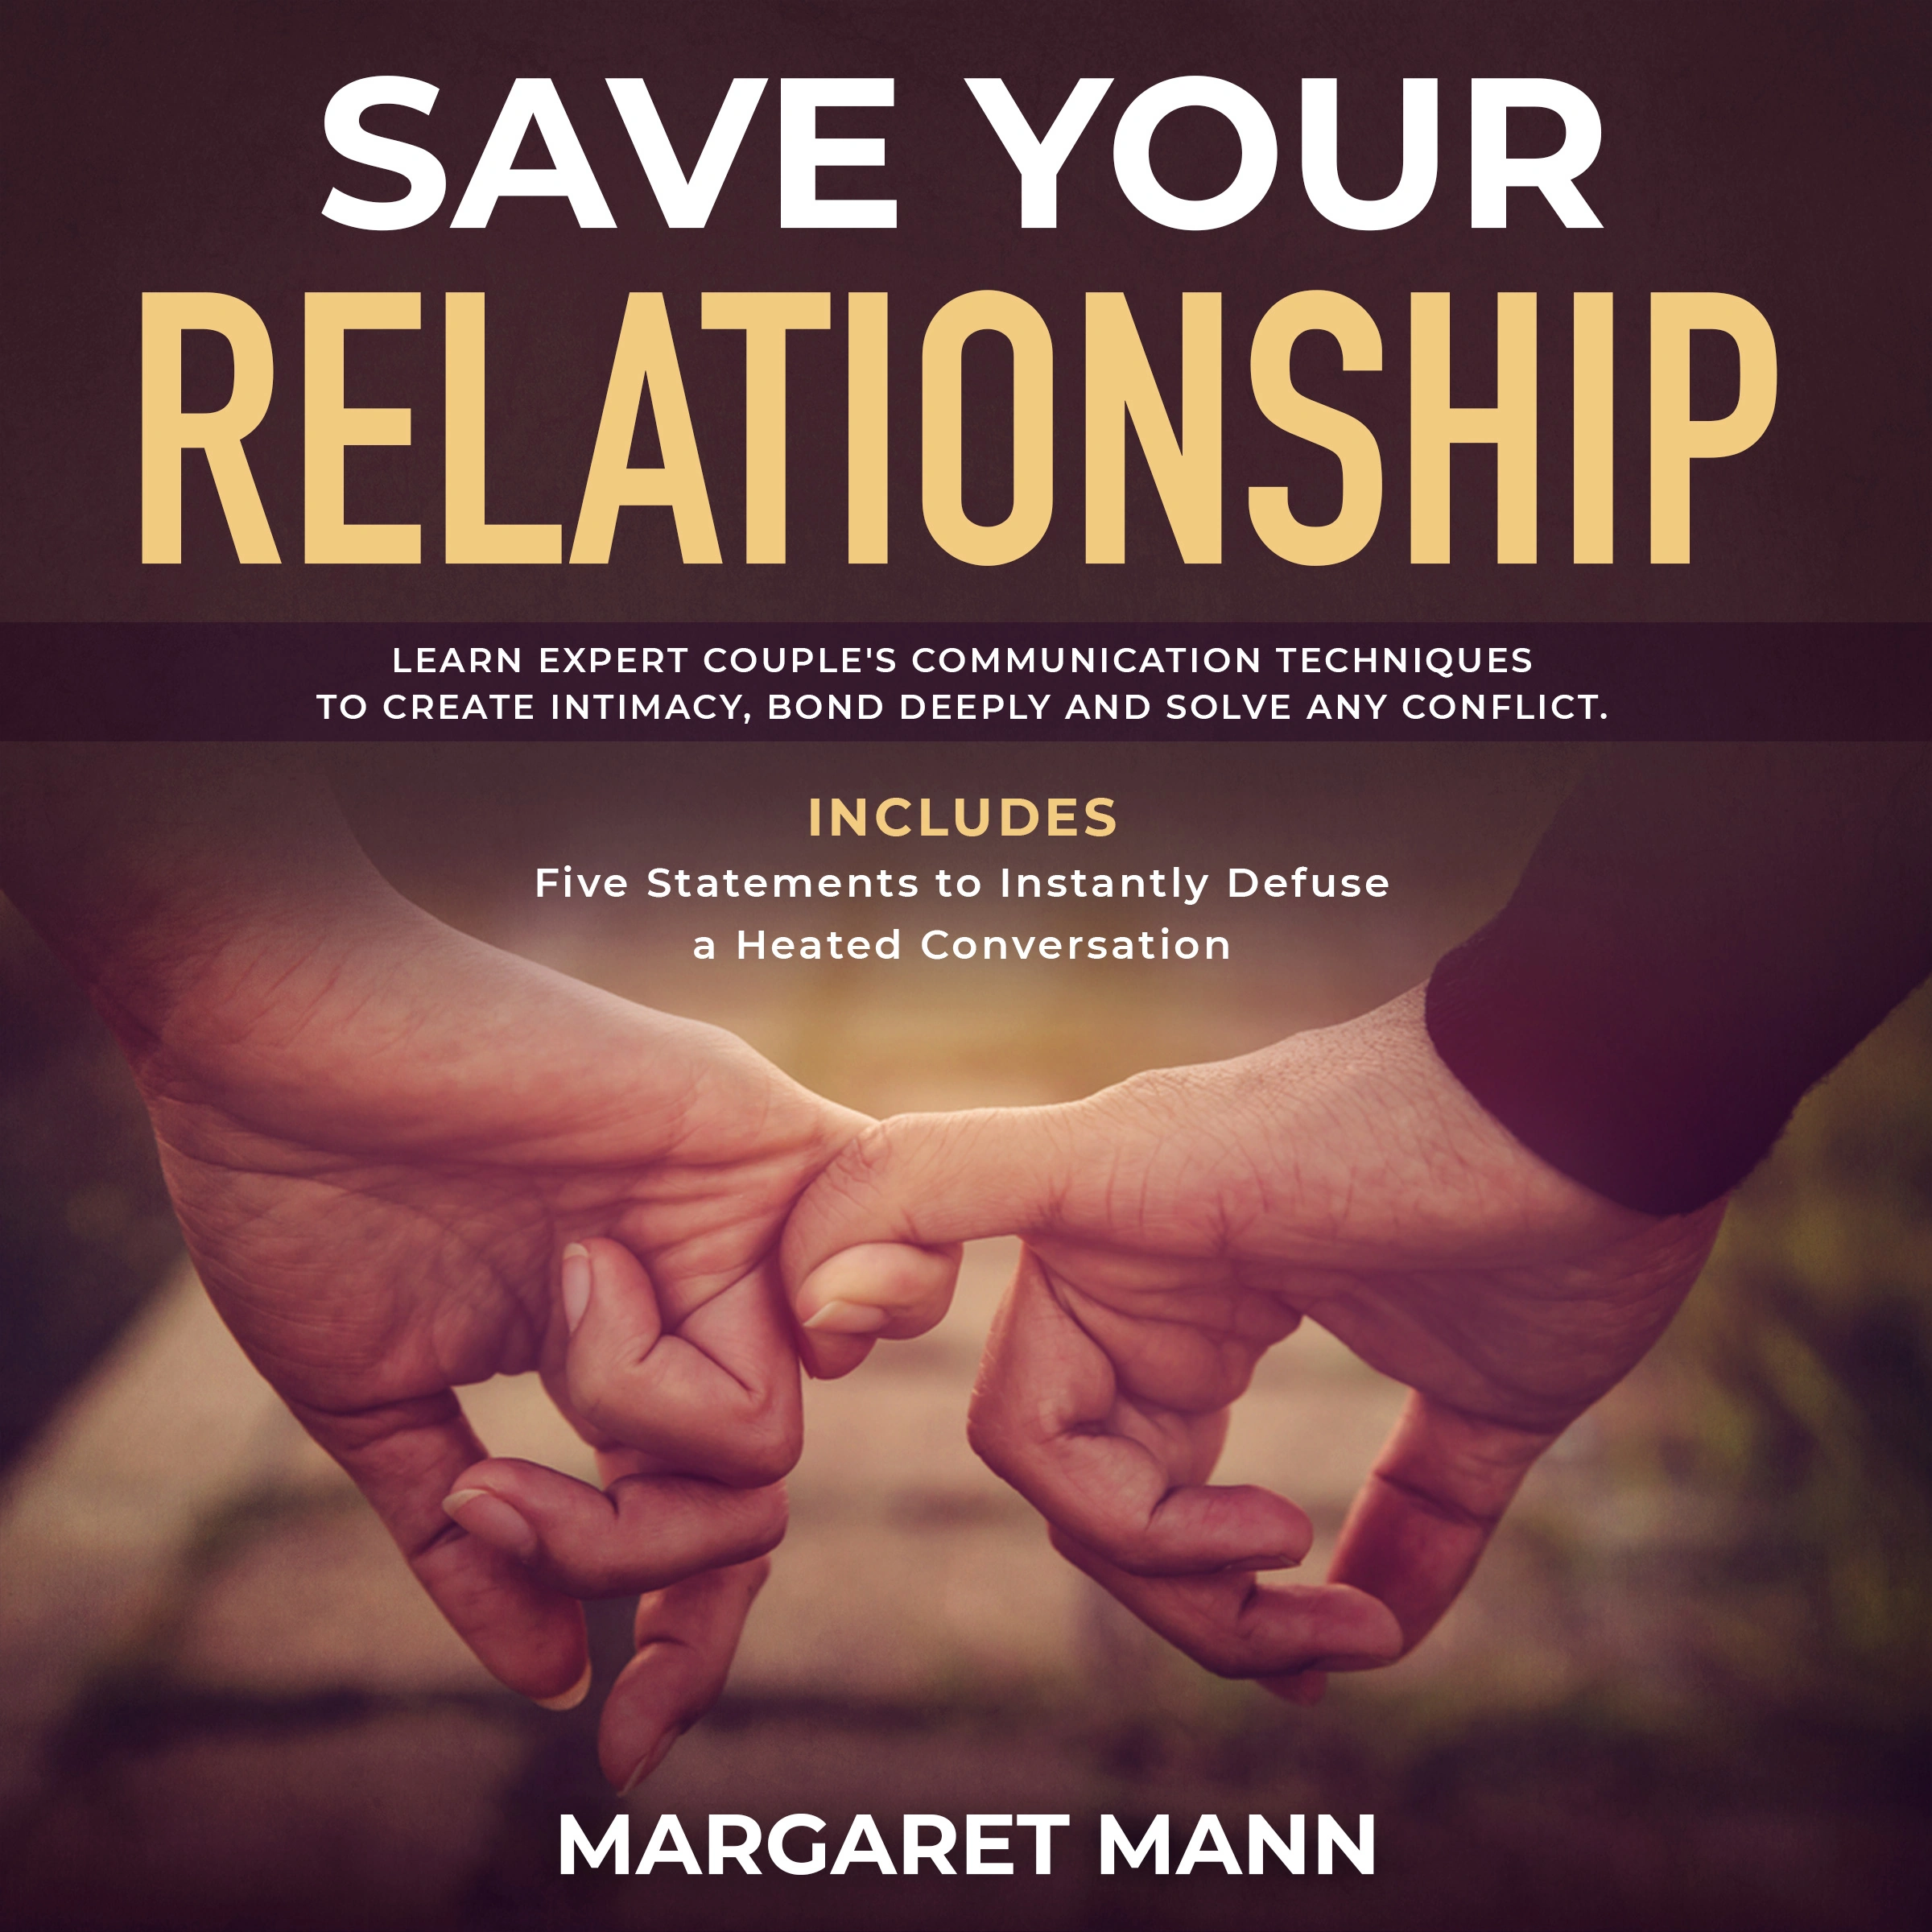 Save Your Relationship by Margaret Mann Audiobook